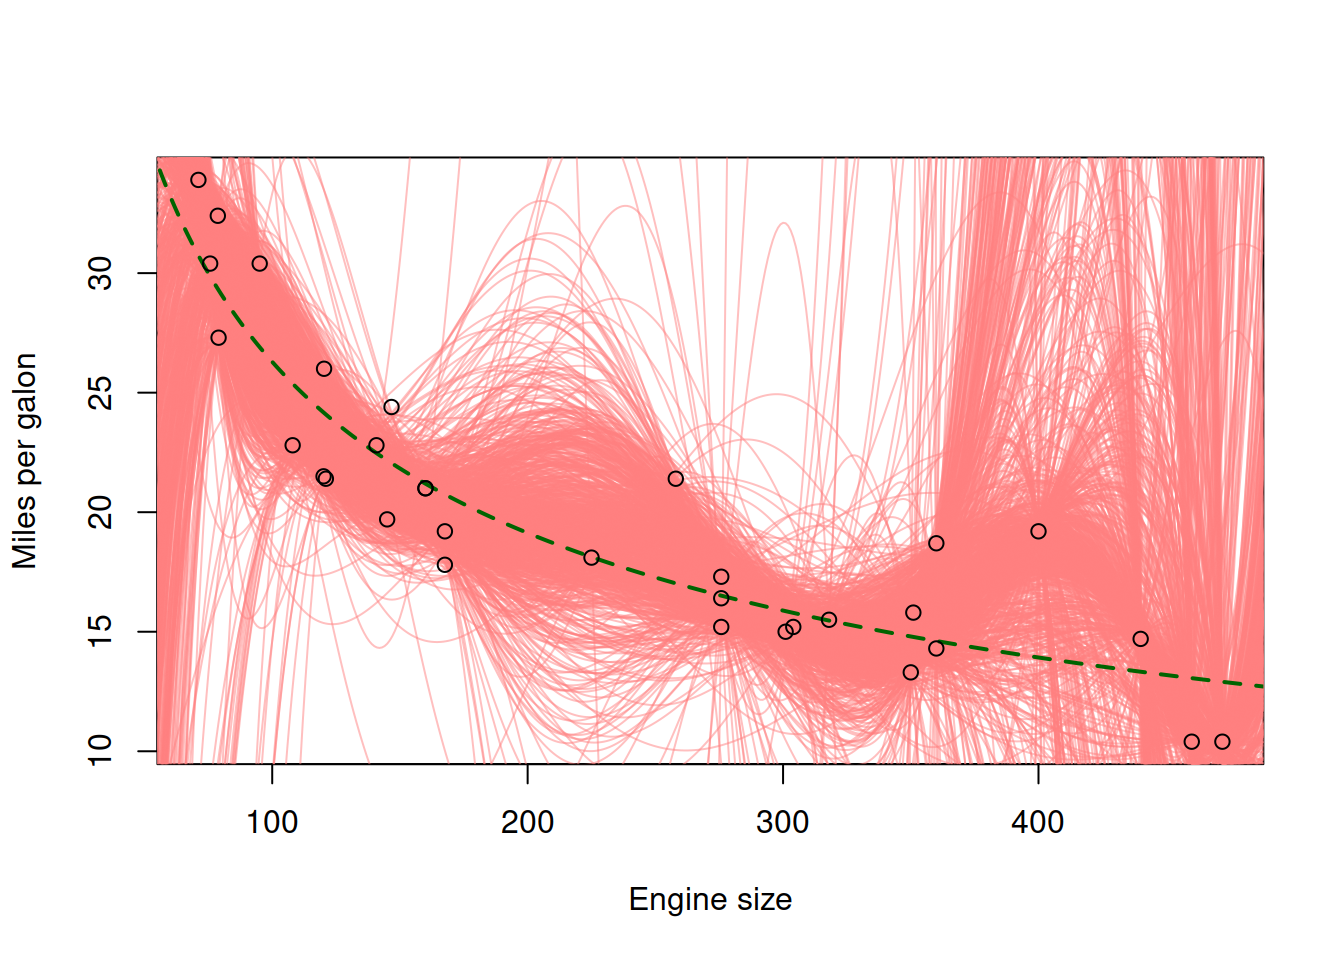 Fuel consumption vs engine size, the true and the polynomial (7th order) models